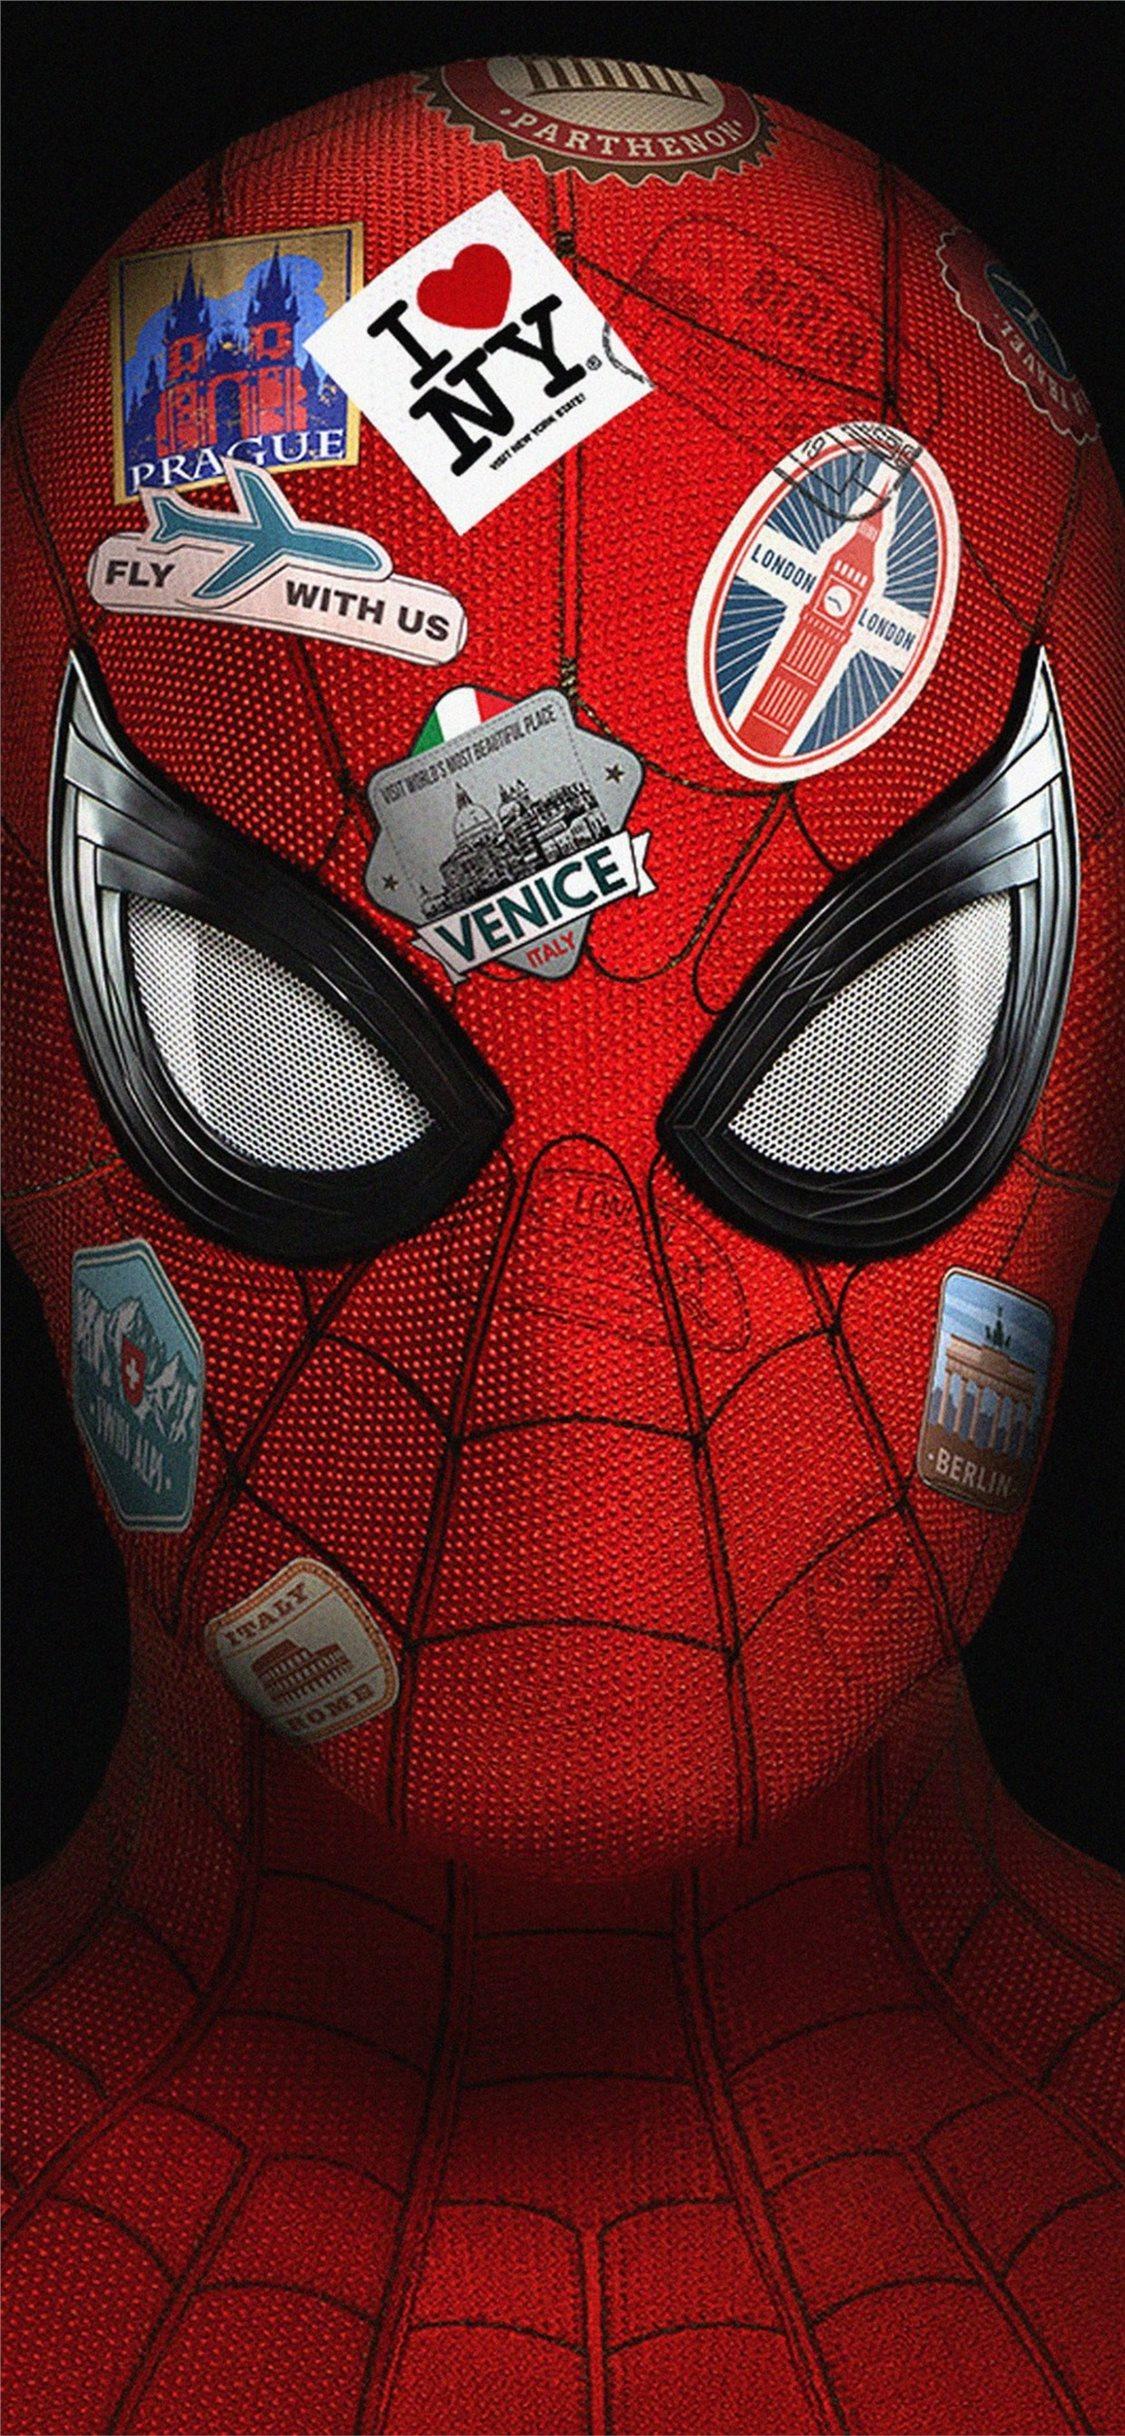 4k spider far from home iPhone 11 Wallpapers Free Download